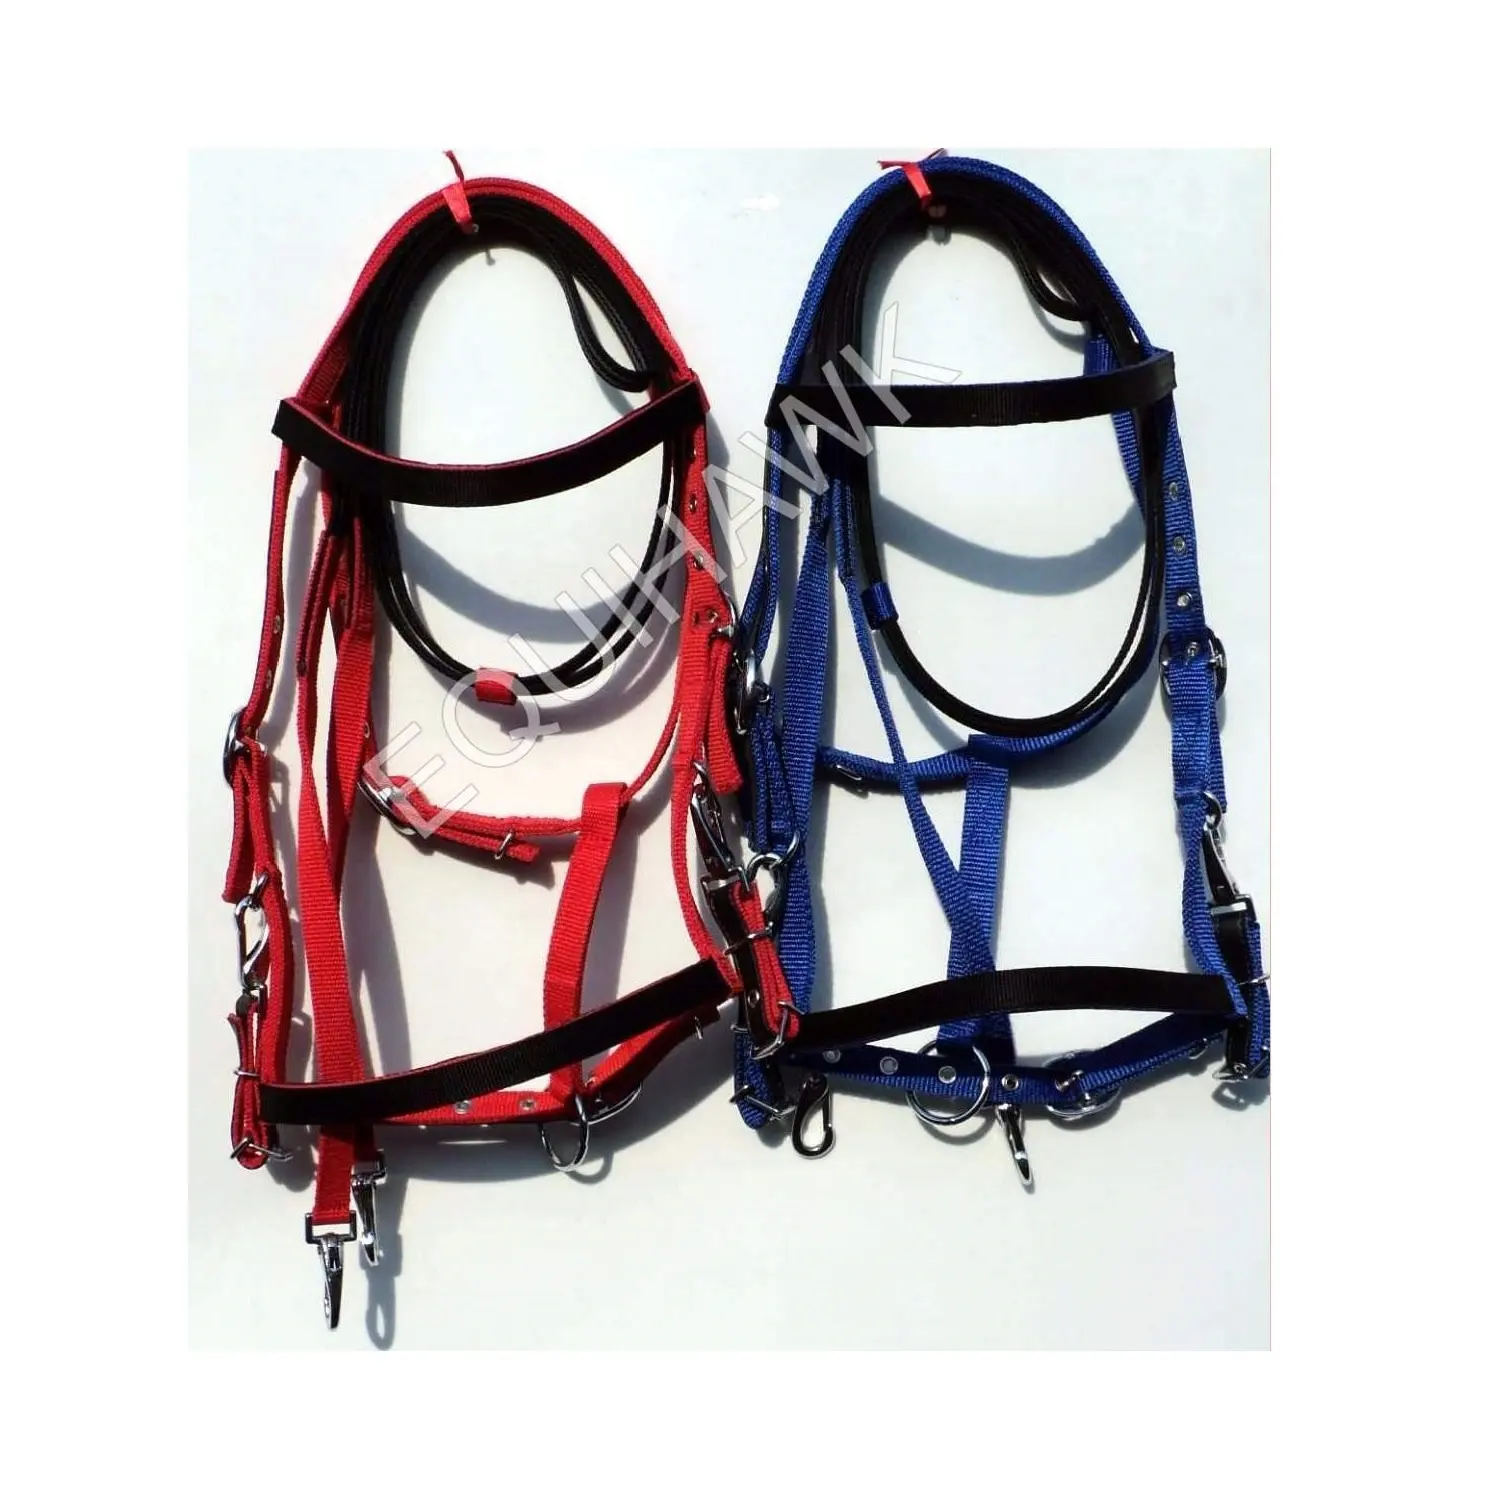 WHOLESALE OF POLY PROPYLENE HORSE BRIDLE CUM HALTER WITH NUBUCK PADDED WITH REINS IRON FITTING HORSE BRIDLE